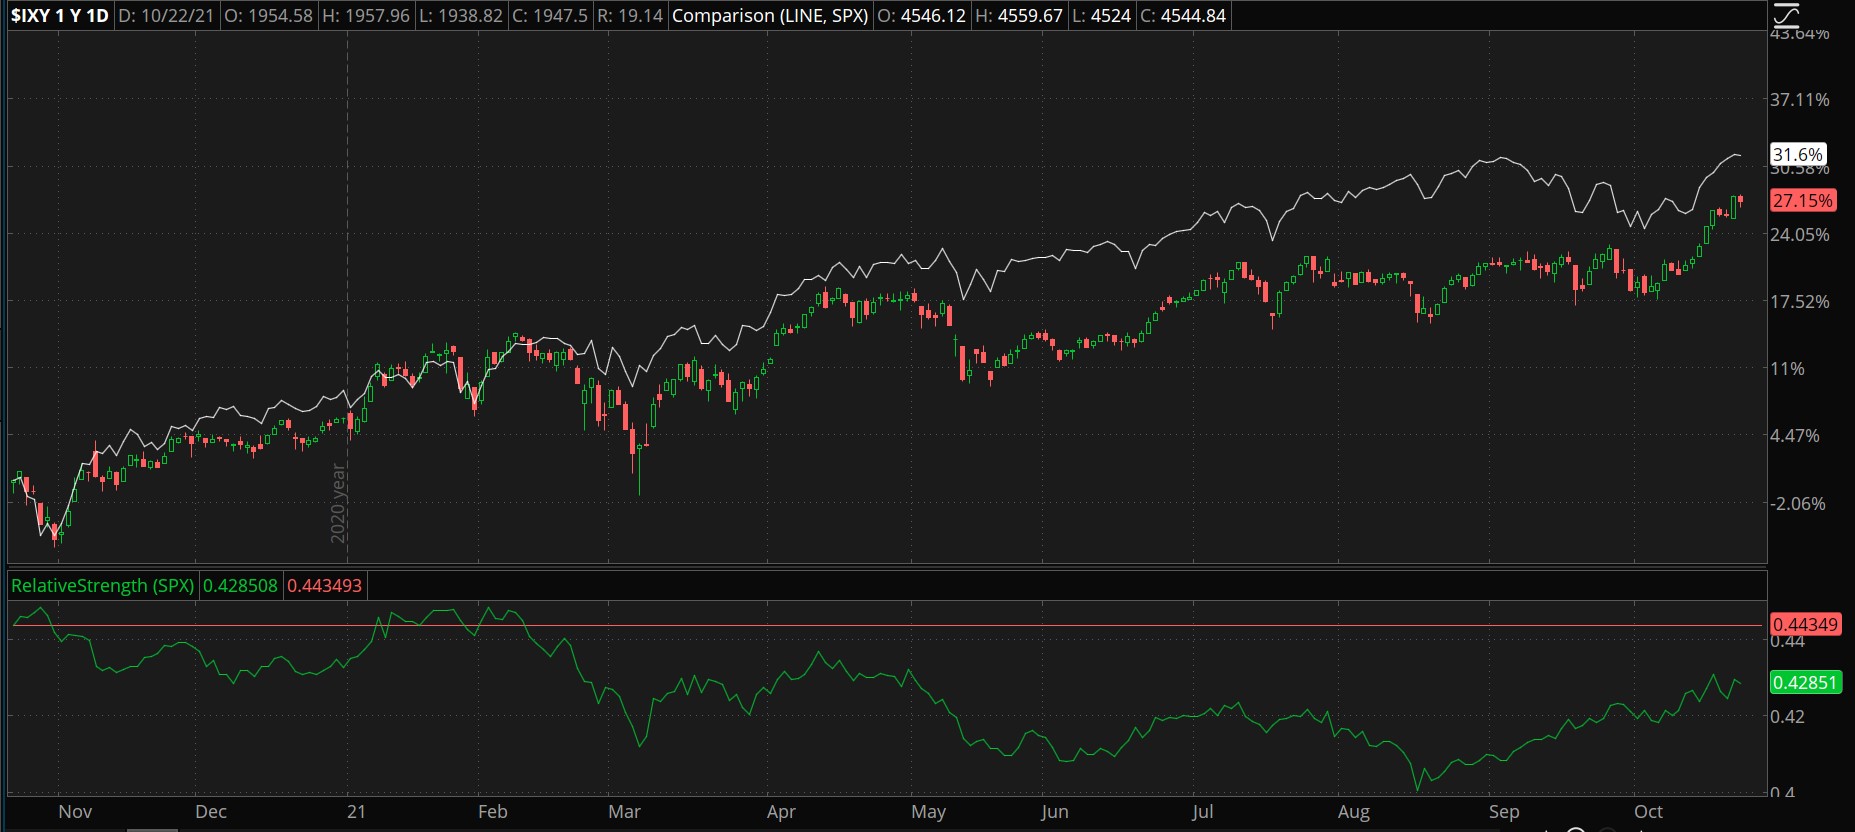 IXY And S&P 500 Combined Chart.